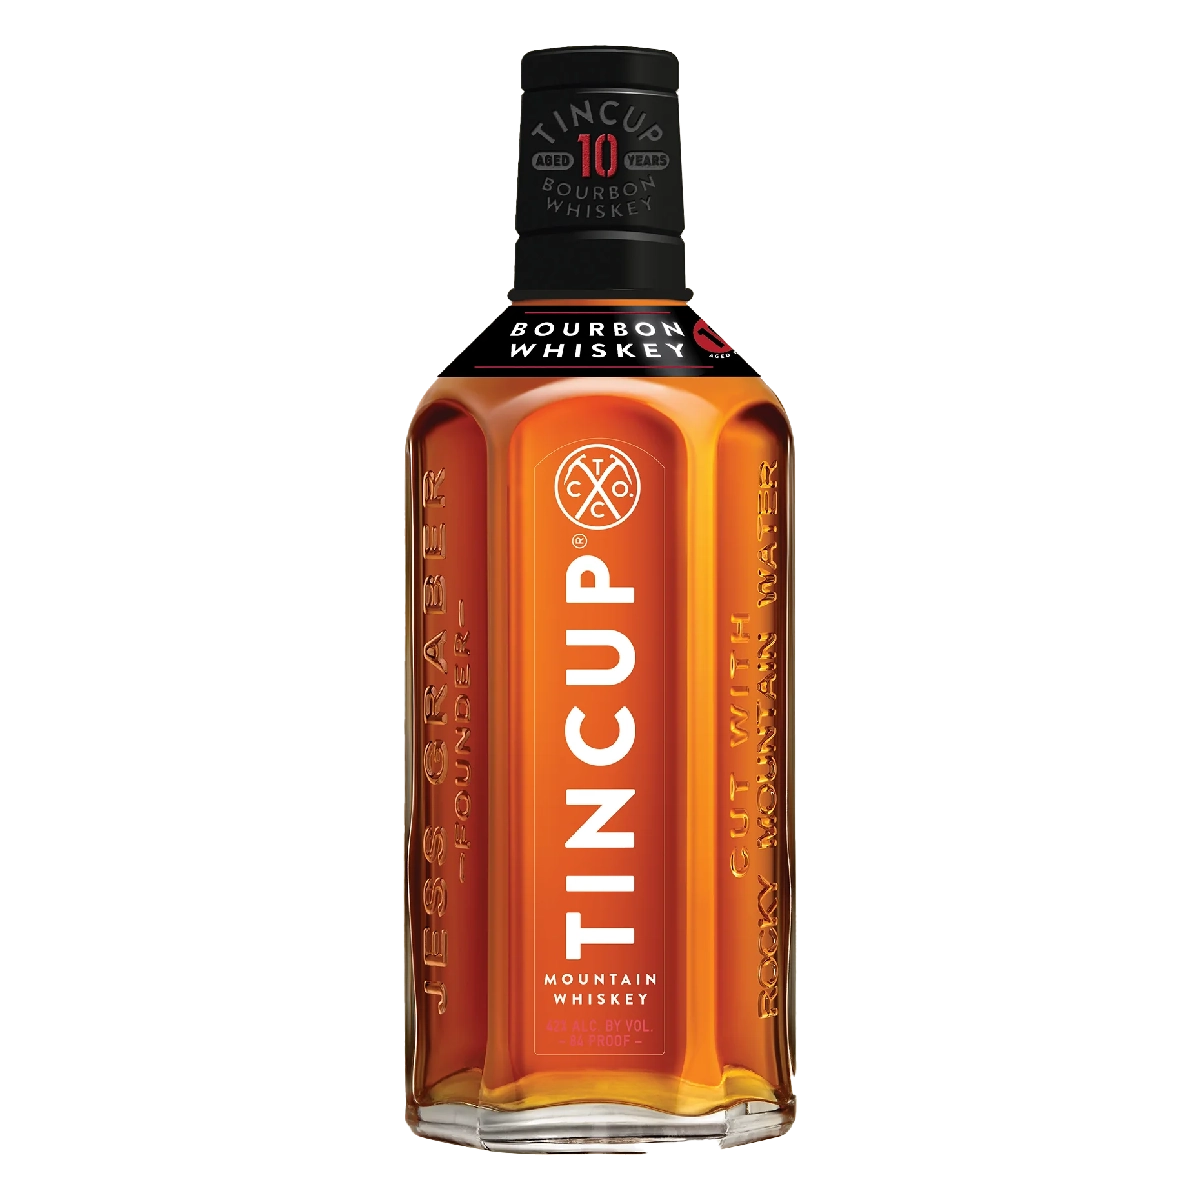 TINCUP 10 Year Bourbon Whiskey